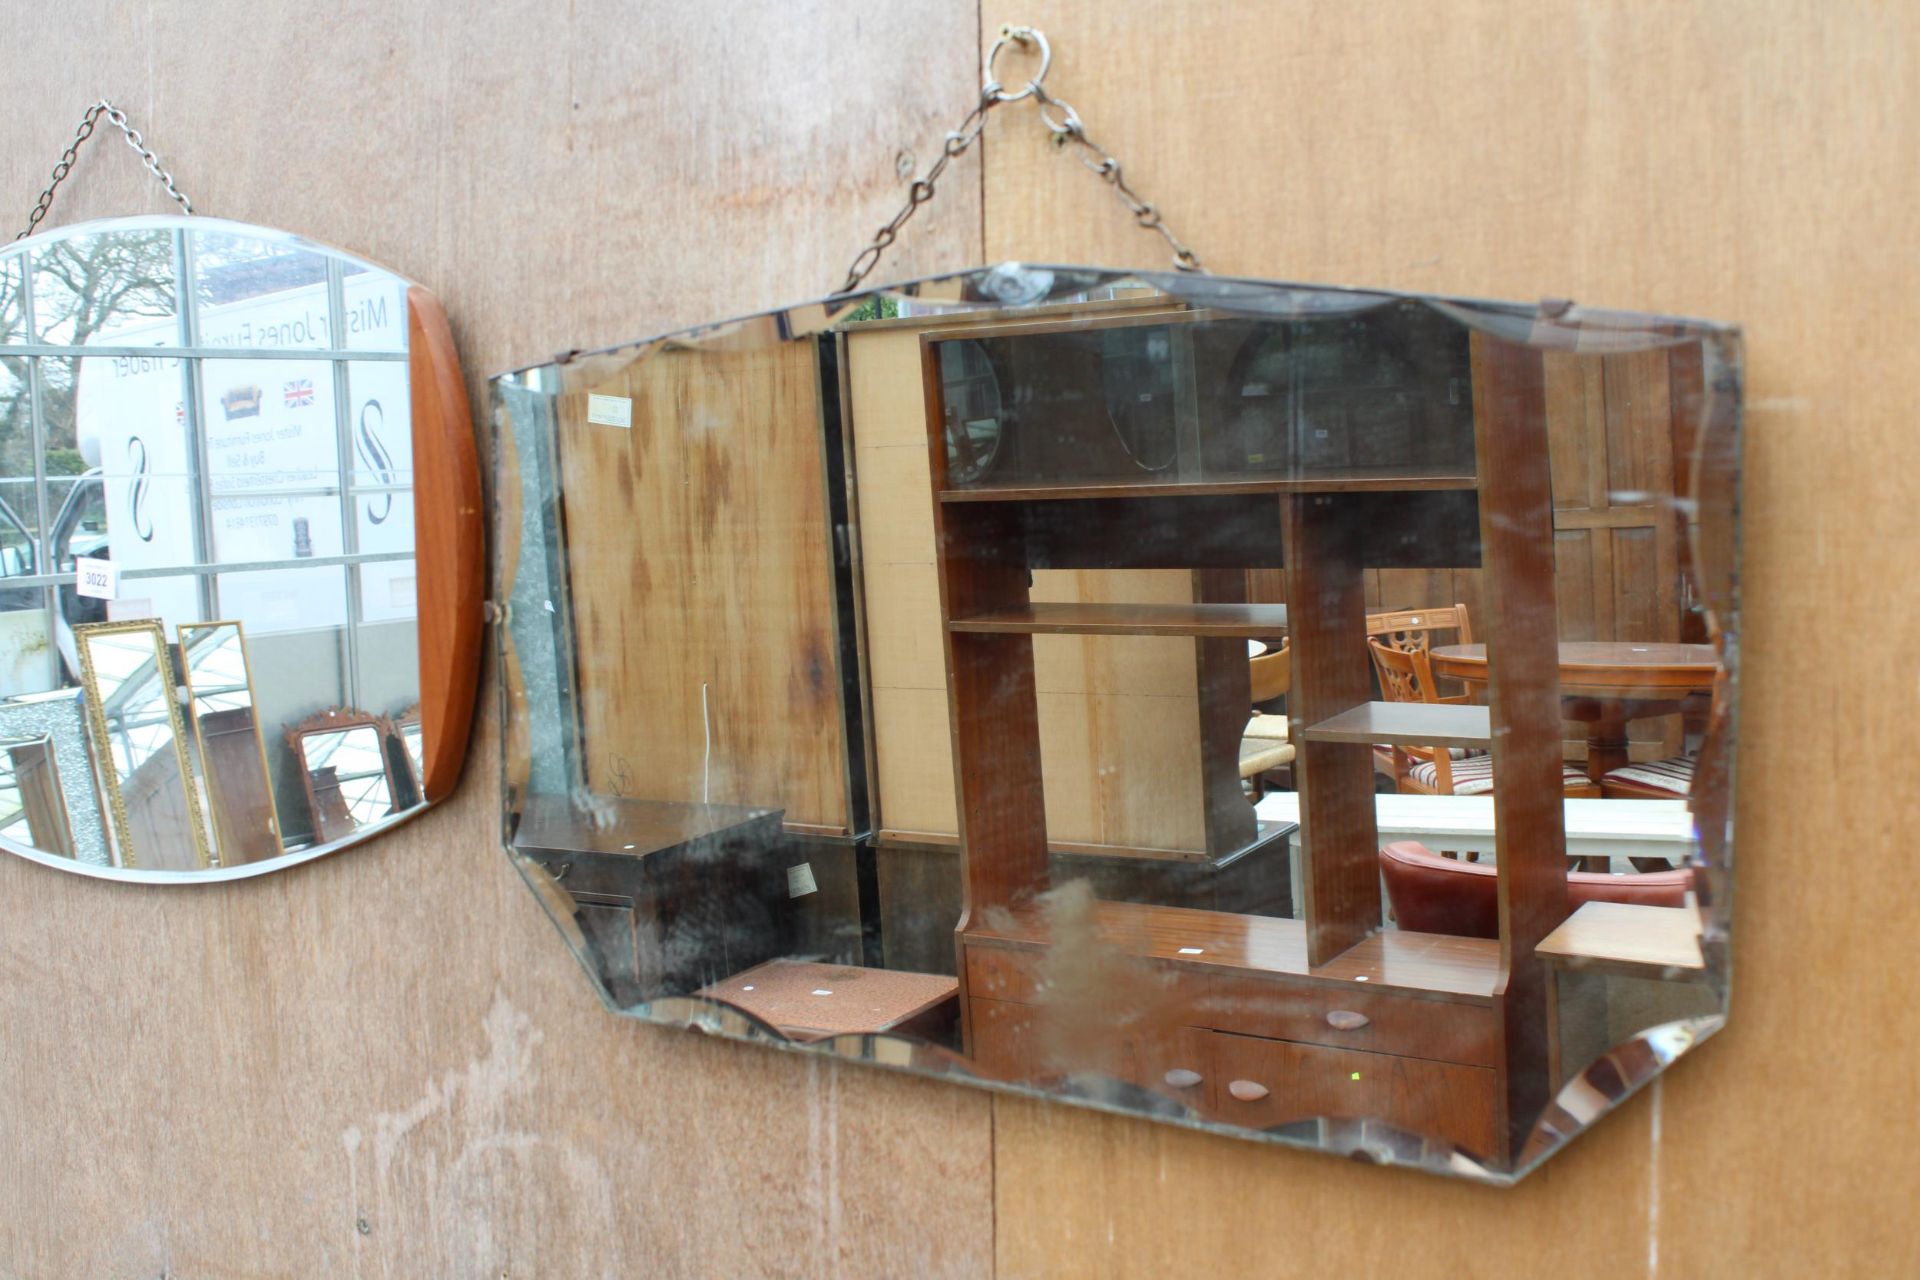 A RETRO WALL MIRROR WITH TEAK EDGES AND A FRAMELESS WALL MIRROR - Image 2 of 2